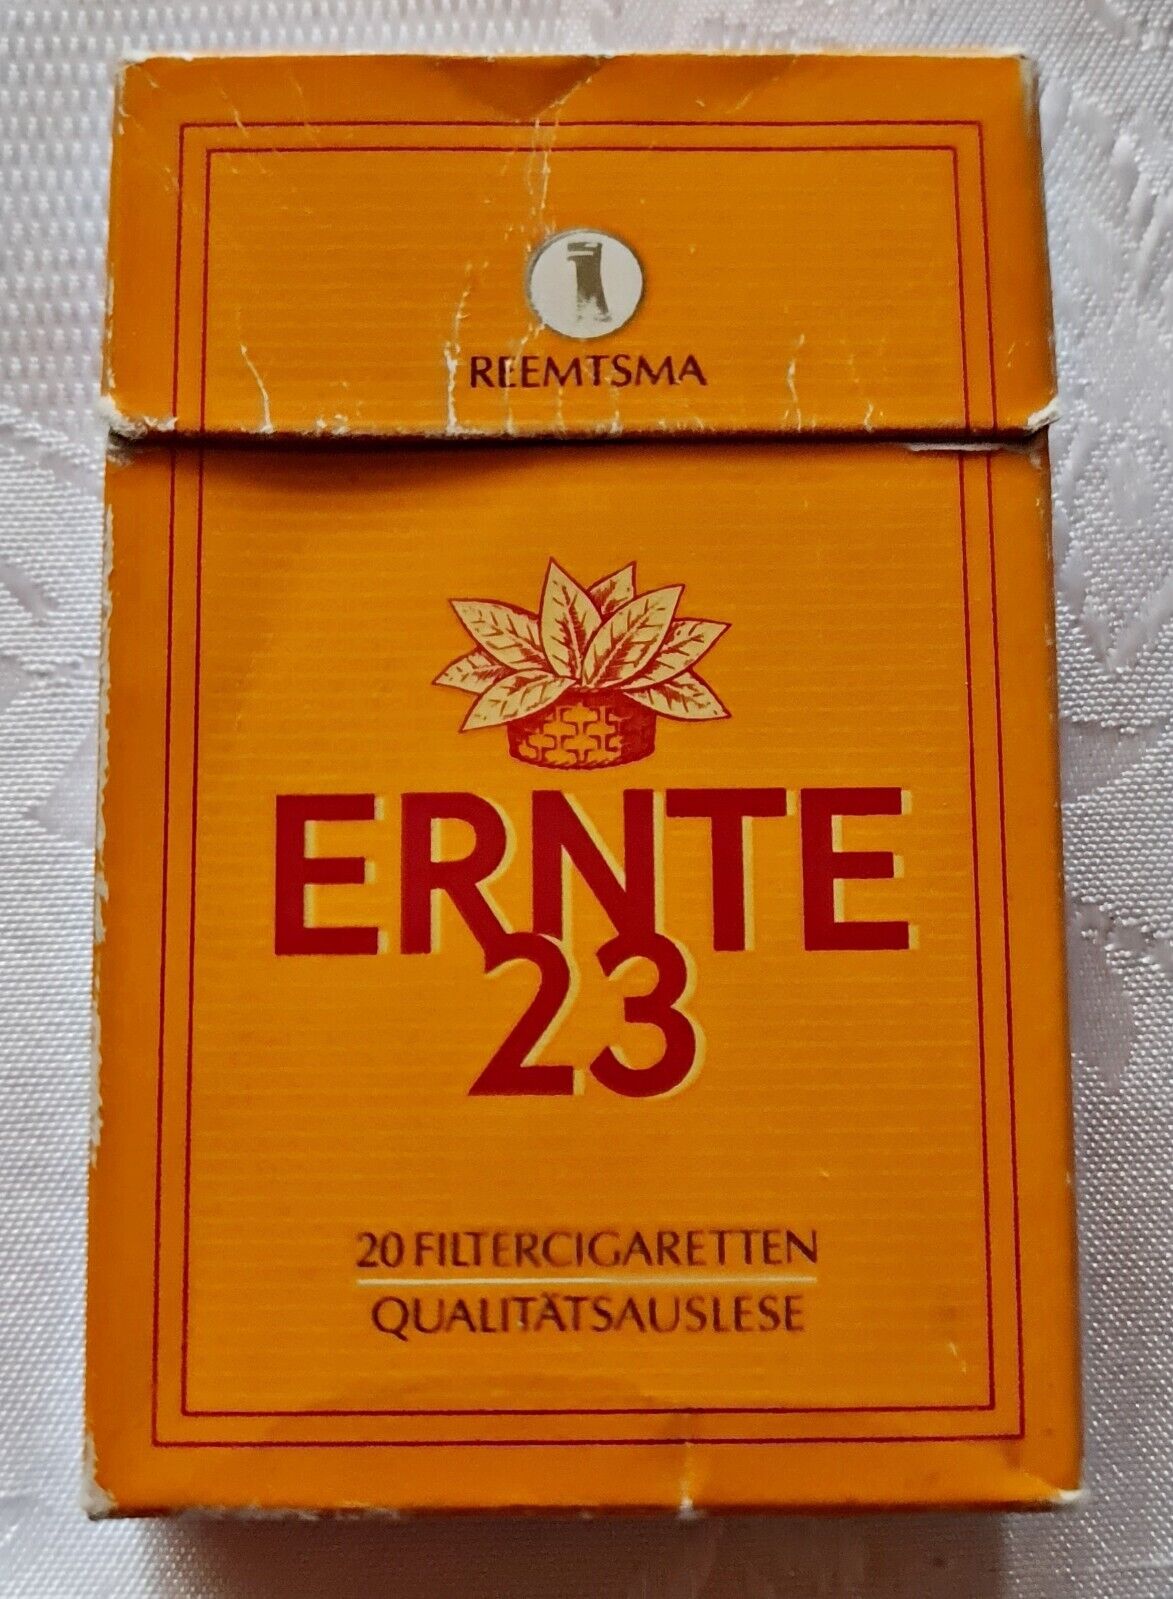 Vintage Authentic Germany ERNTE 23 80's Cigarette Packet Tobacco Empty Box